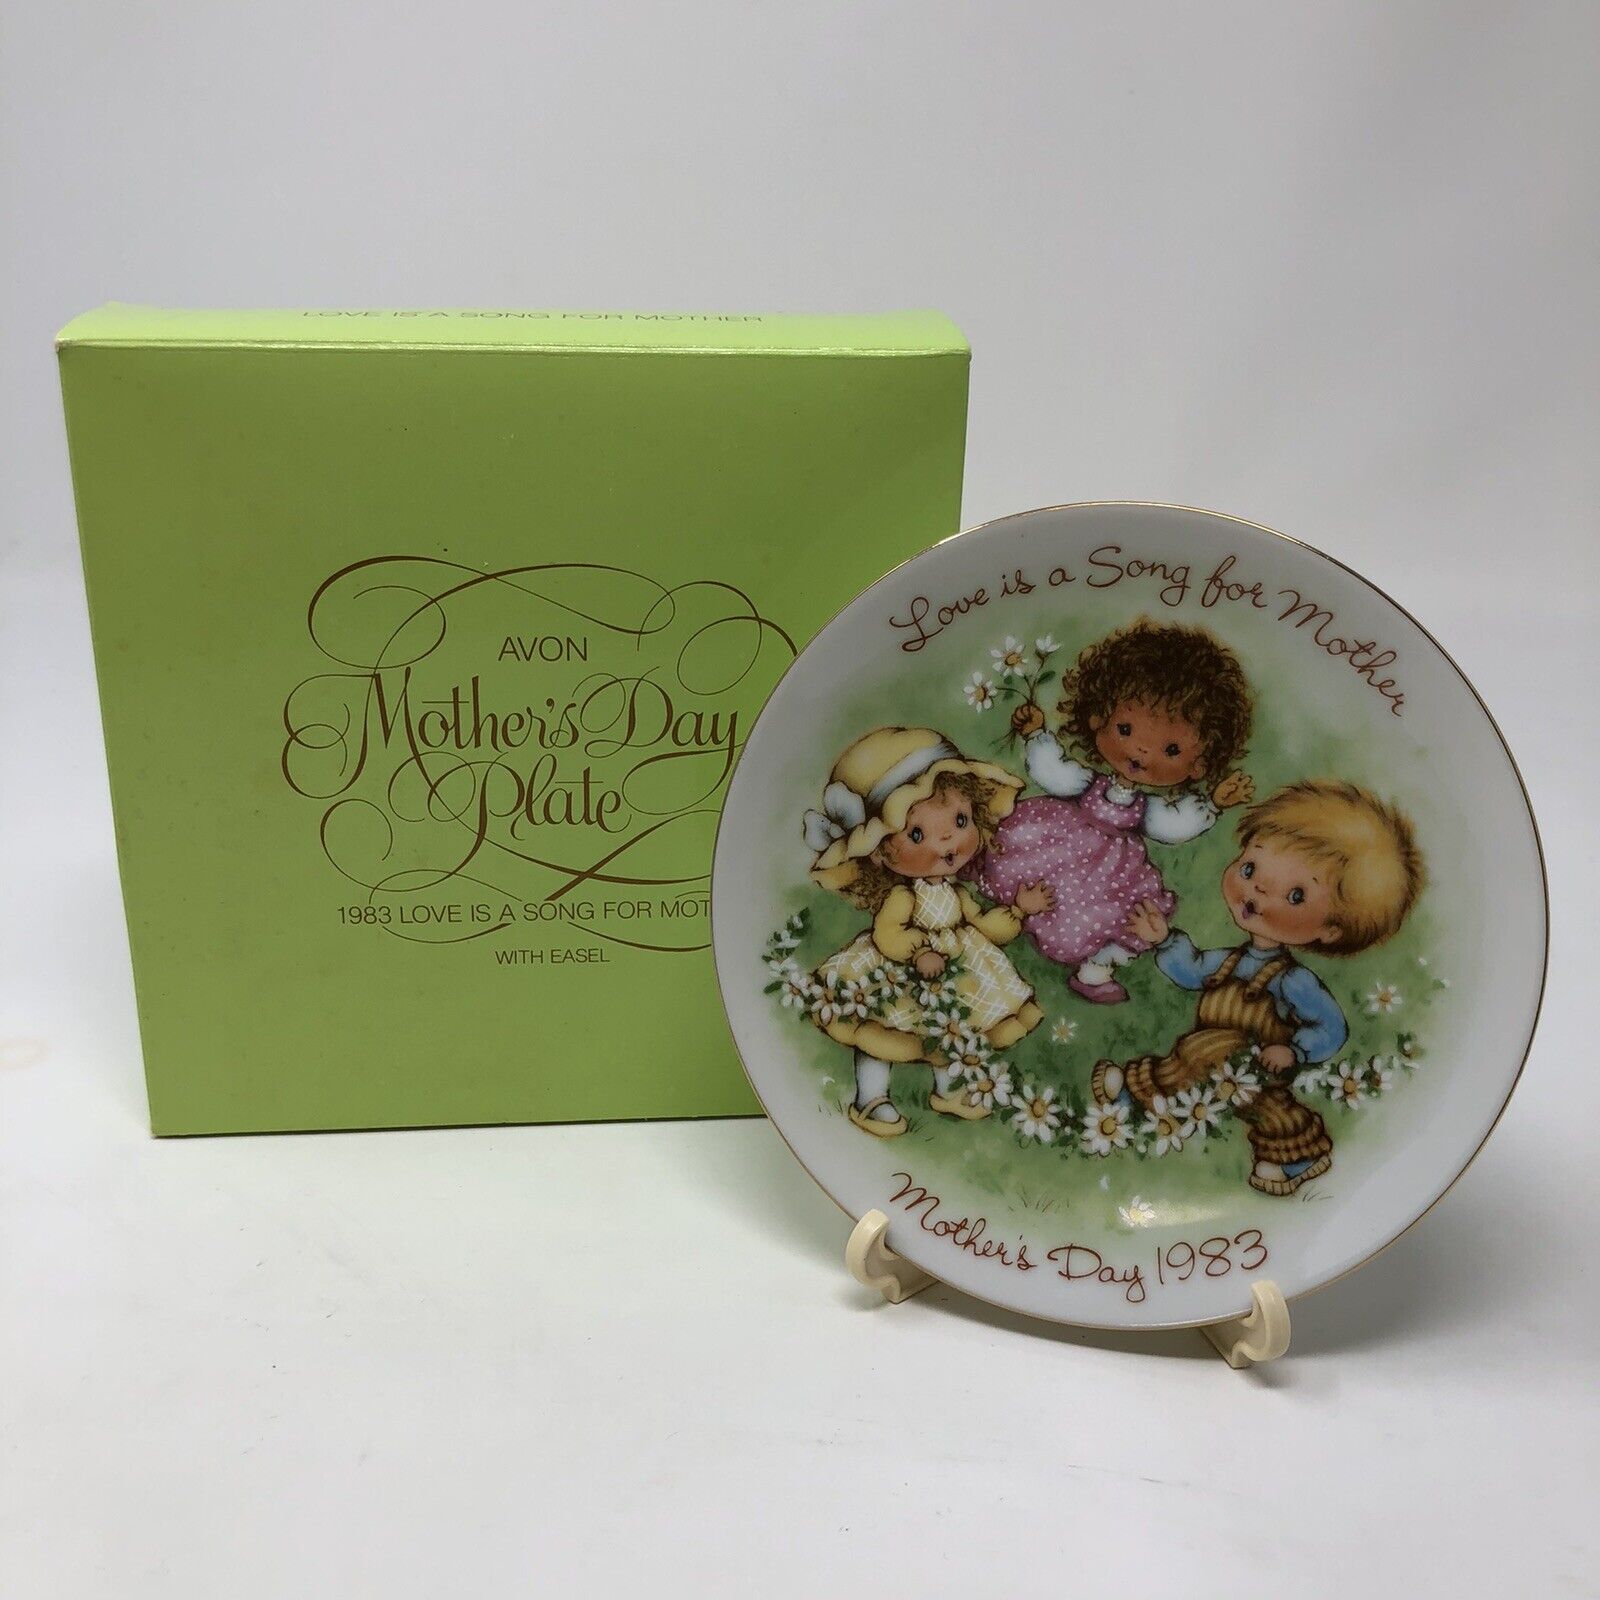 Avon 1983 Mothers Day Plate Love Is A Song For Mother with Easel Holder NOS New